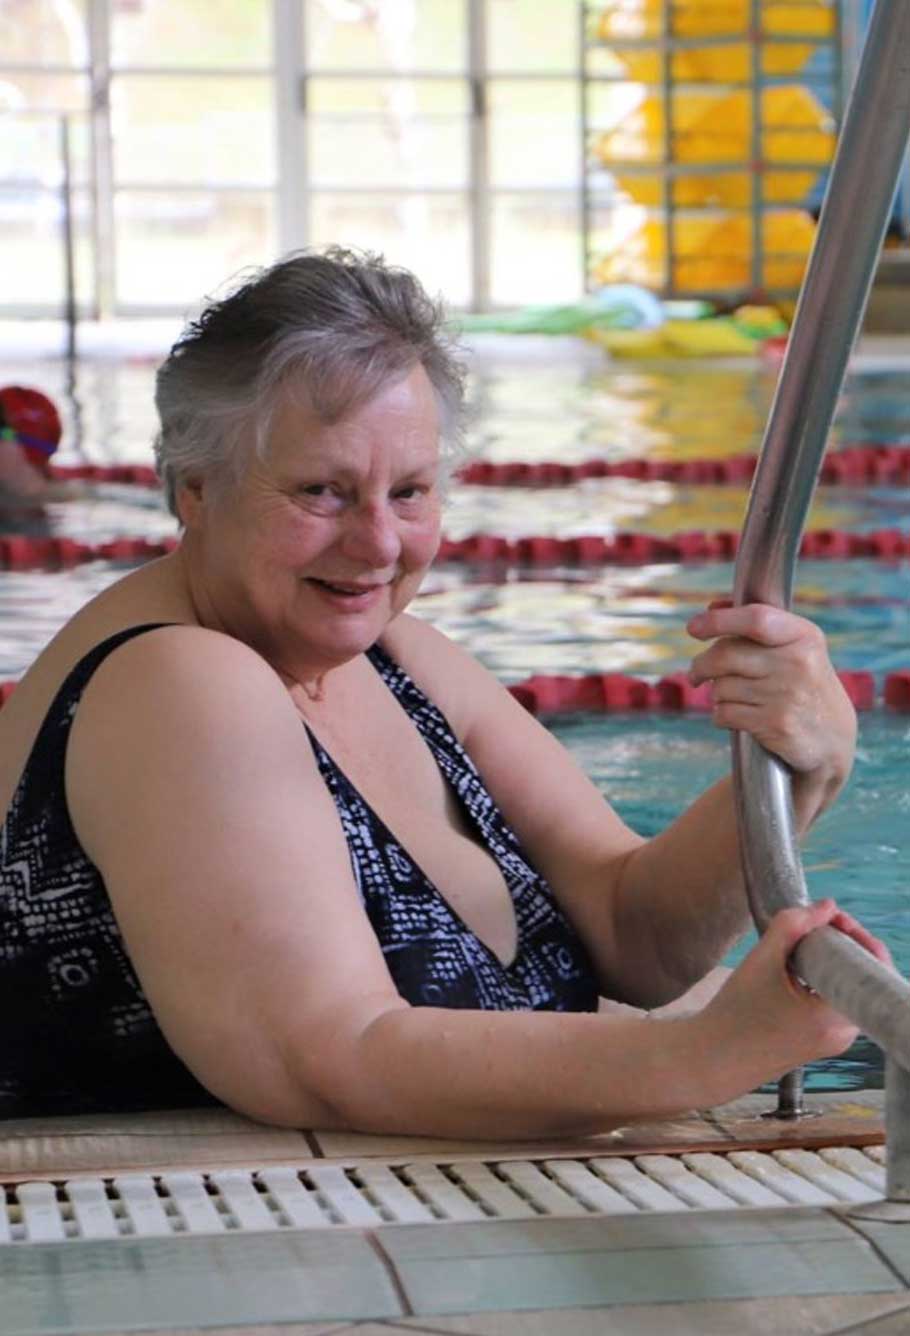 Personal training sessions at the Hobart Aquatic Centre